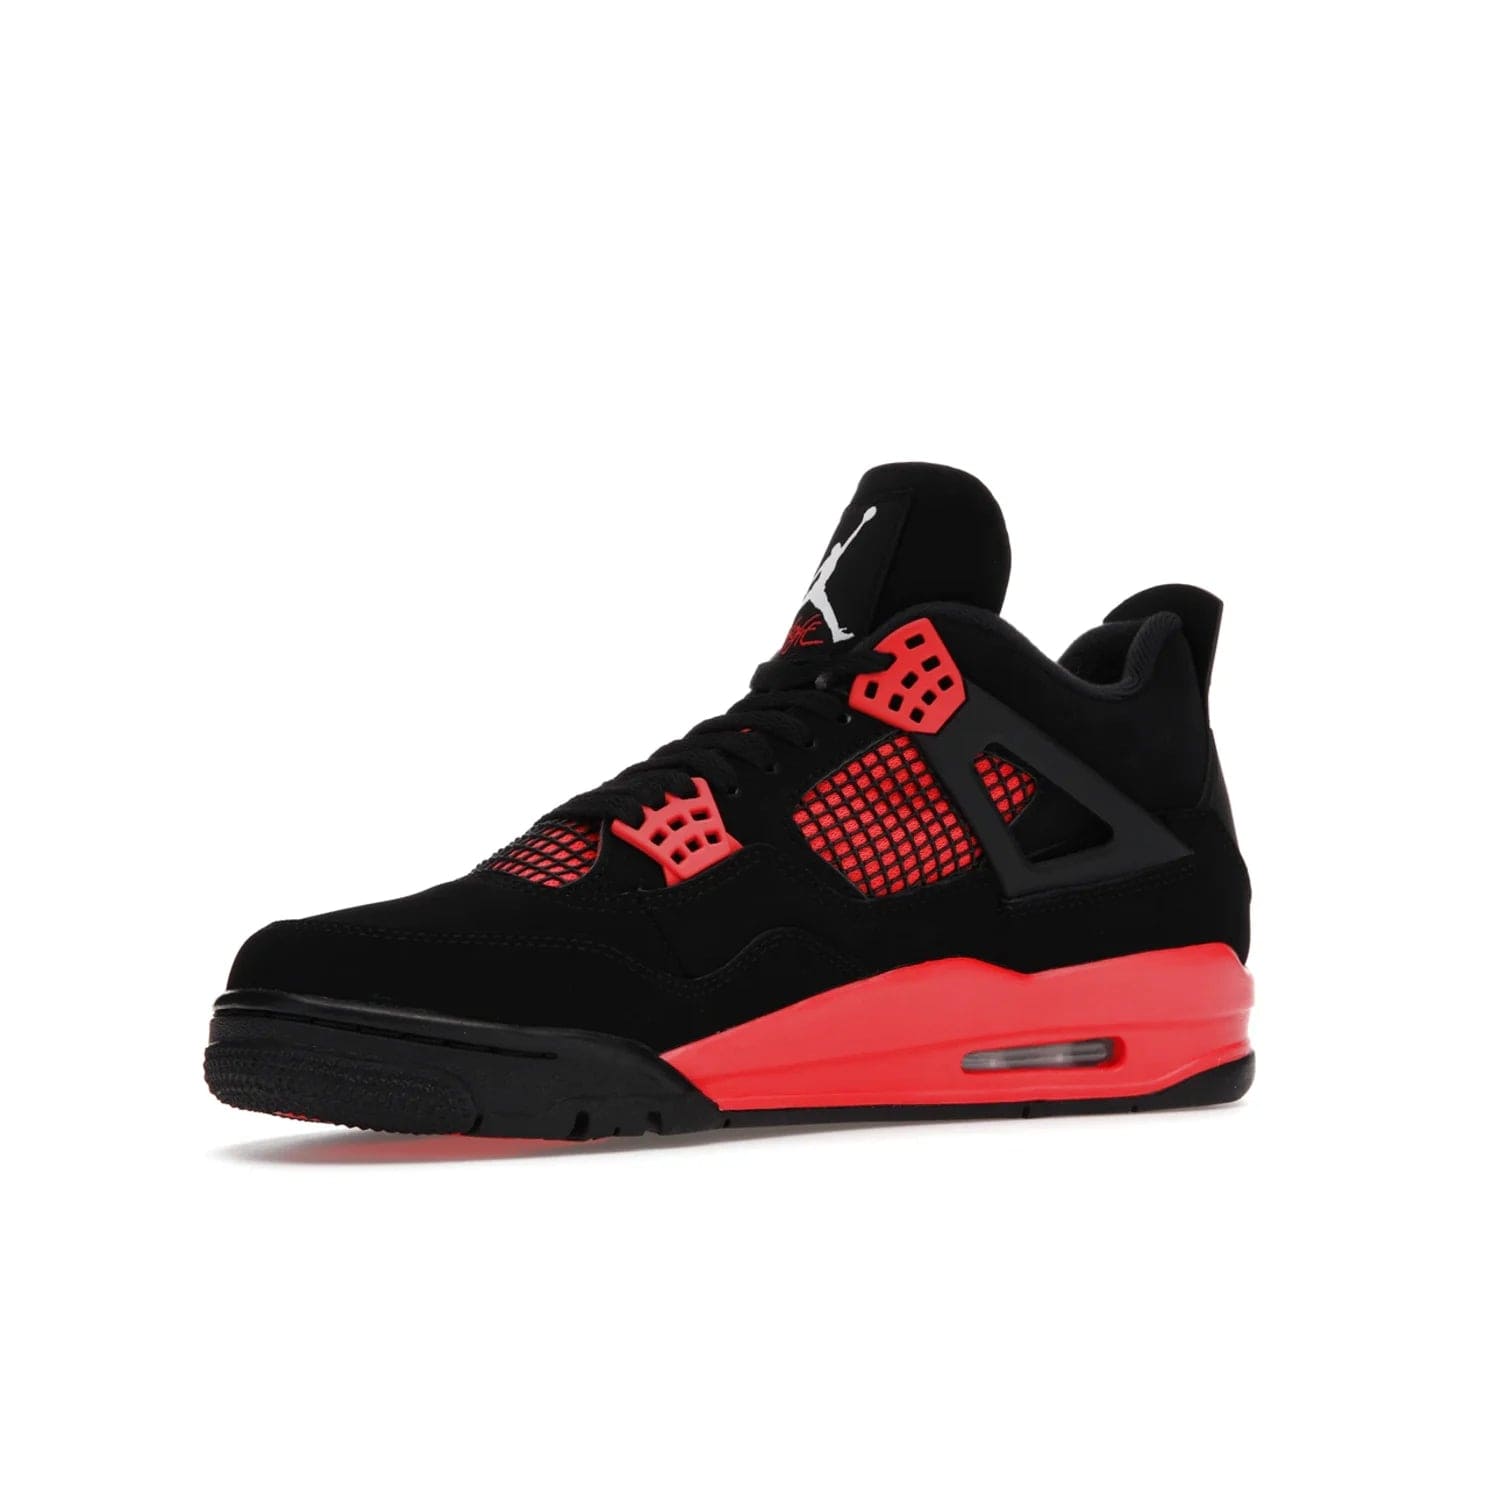 Jordan 4 Retro Red Thunder - Image 16 - Only at www.BallersClubKickz.com - Upscale your footwear with the Air Jordan 4 Retro Red Thunder. Featuring a Durabuck upper, red underlays, signature Flight patch, and vibrant red midsole, this retro sneaker adds style and edge. Releases in January 2022.